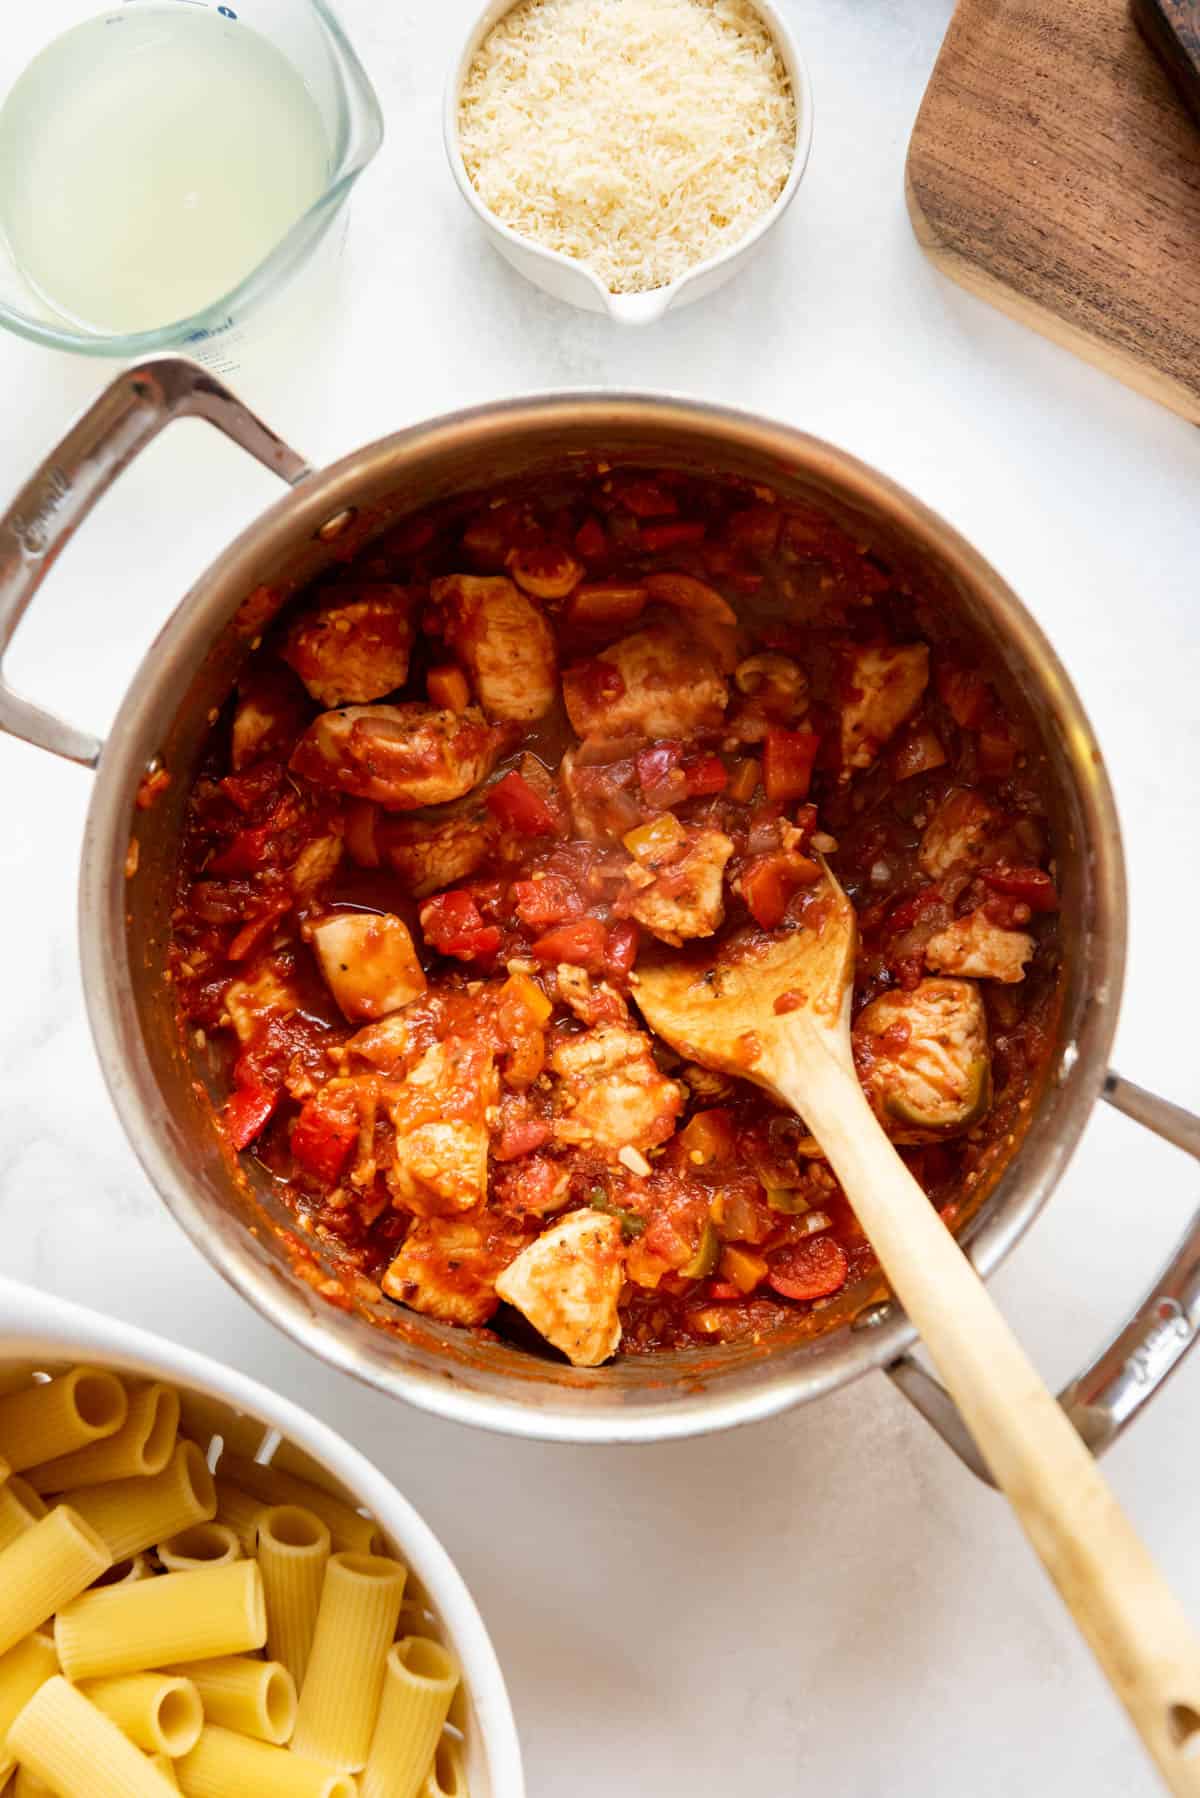 Combining a tomato and veggie sauce with seared chicken breast pieces in a large pot.